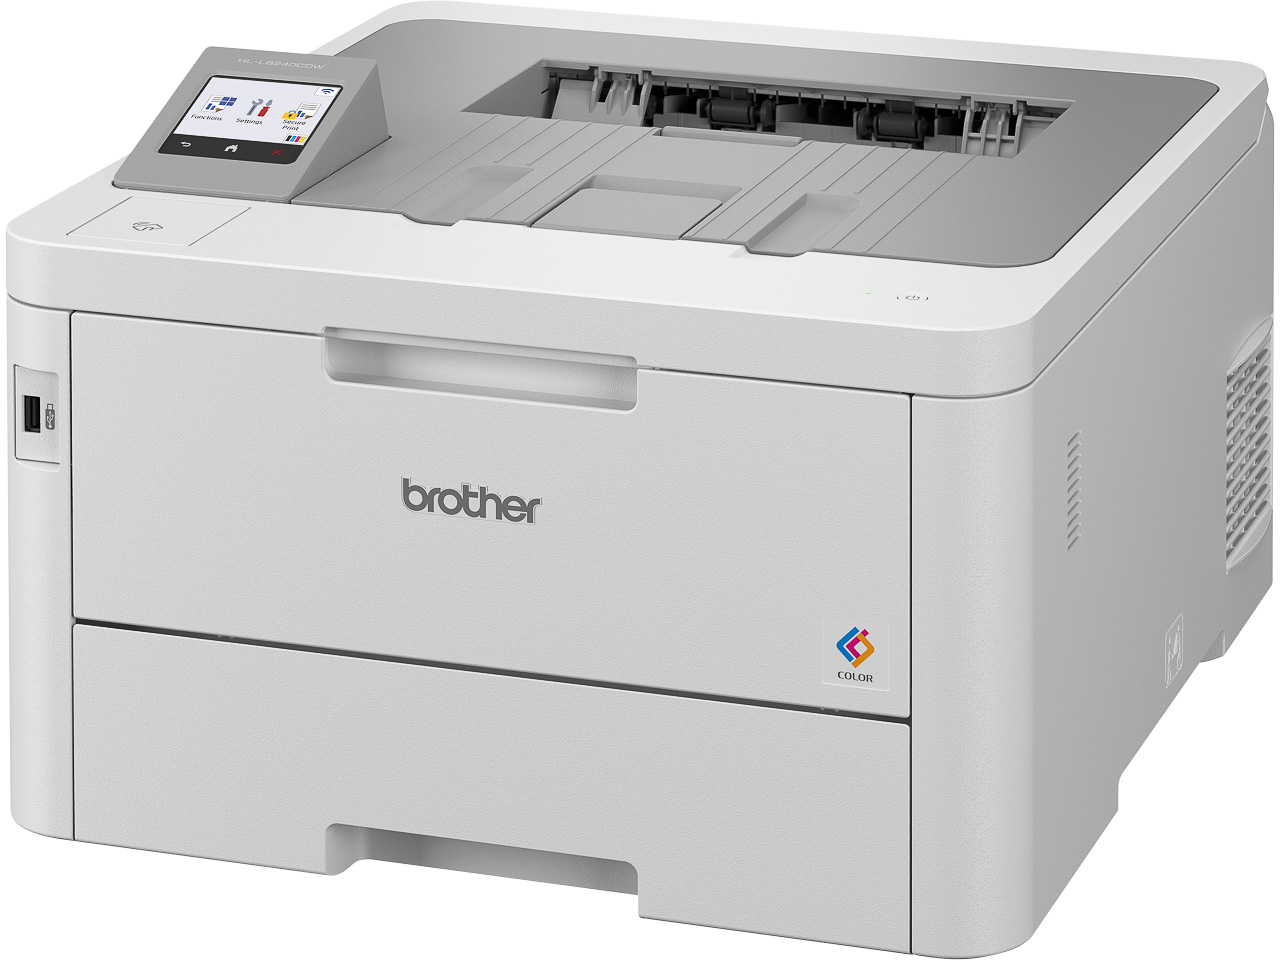 HLL8240CDWRE1 BROTHER HLL8240CDW LED Printer color A4 LAN Duplex 1